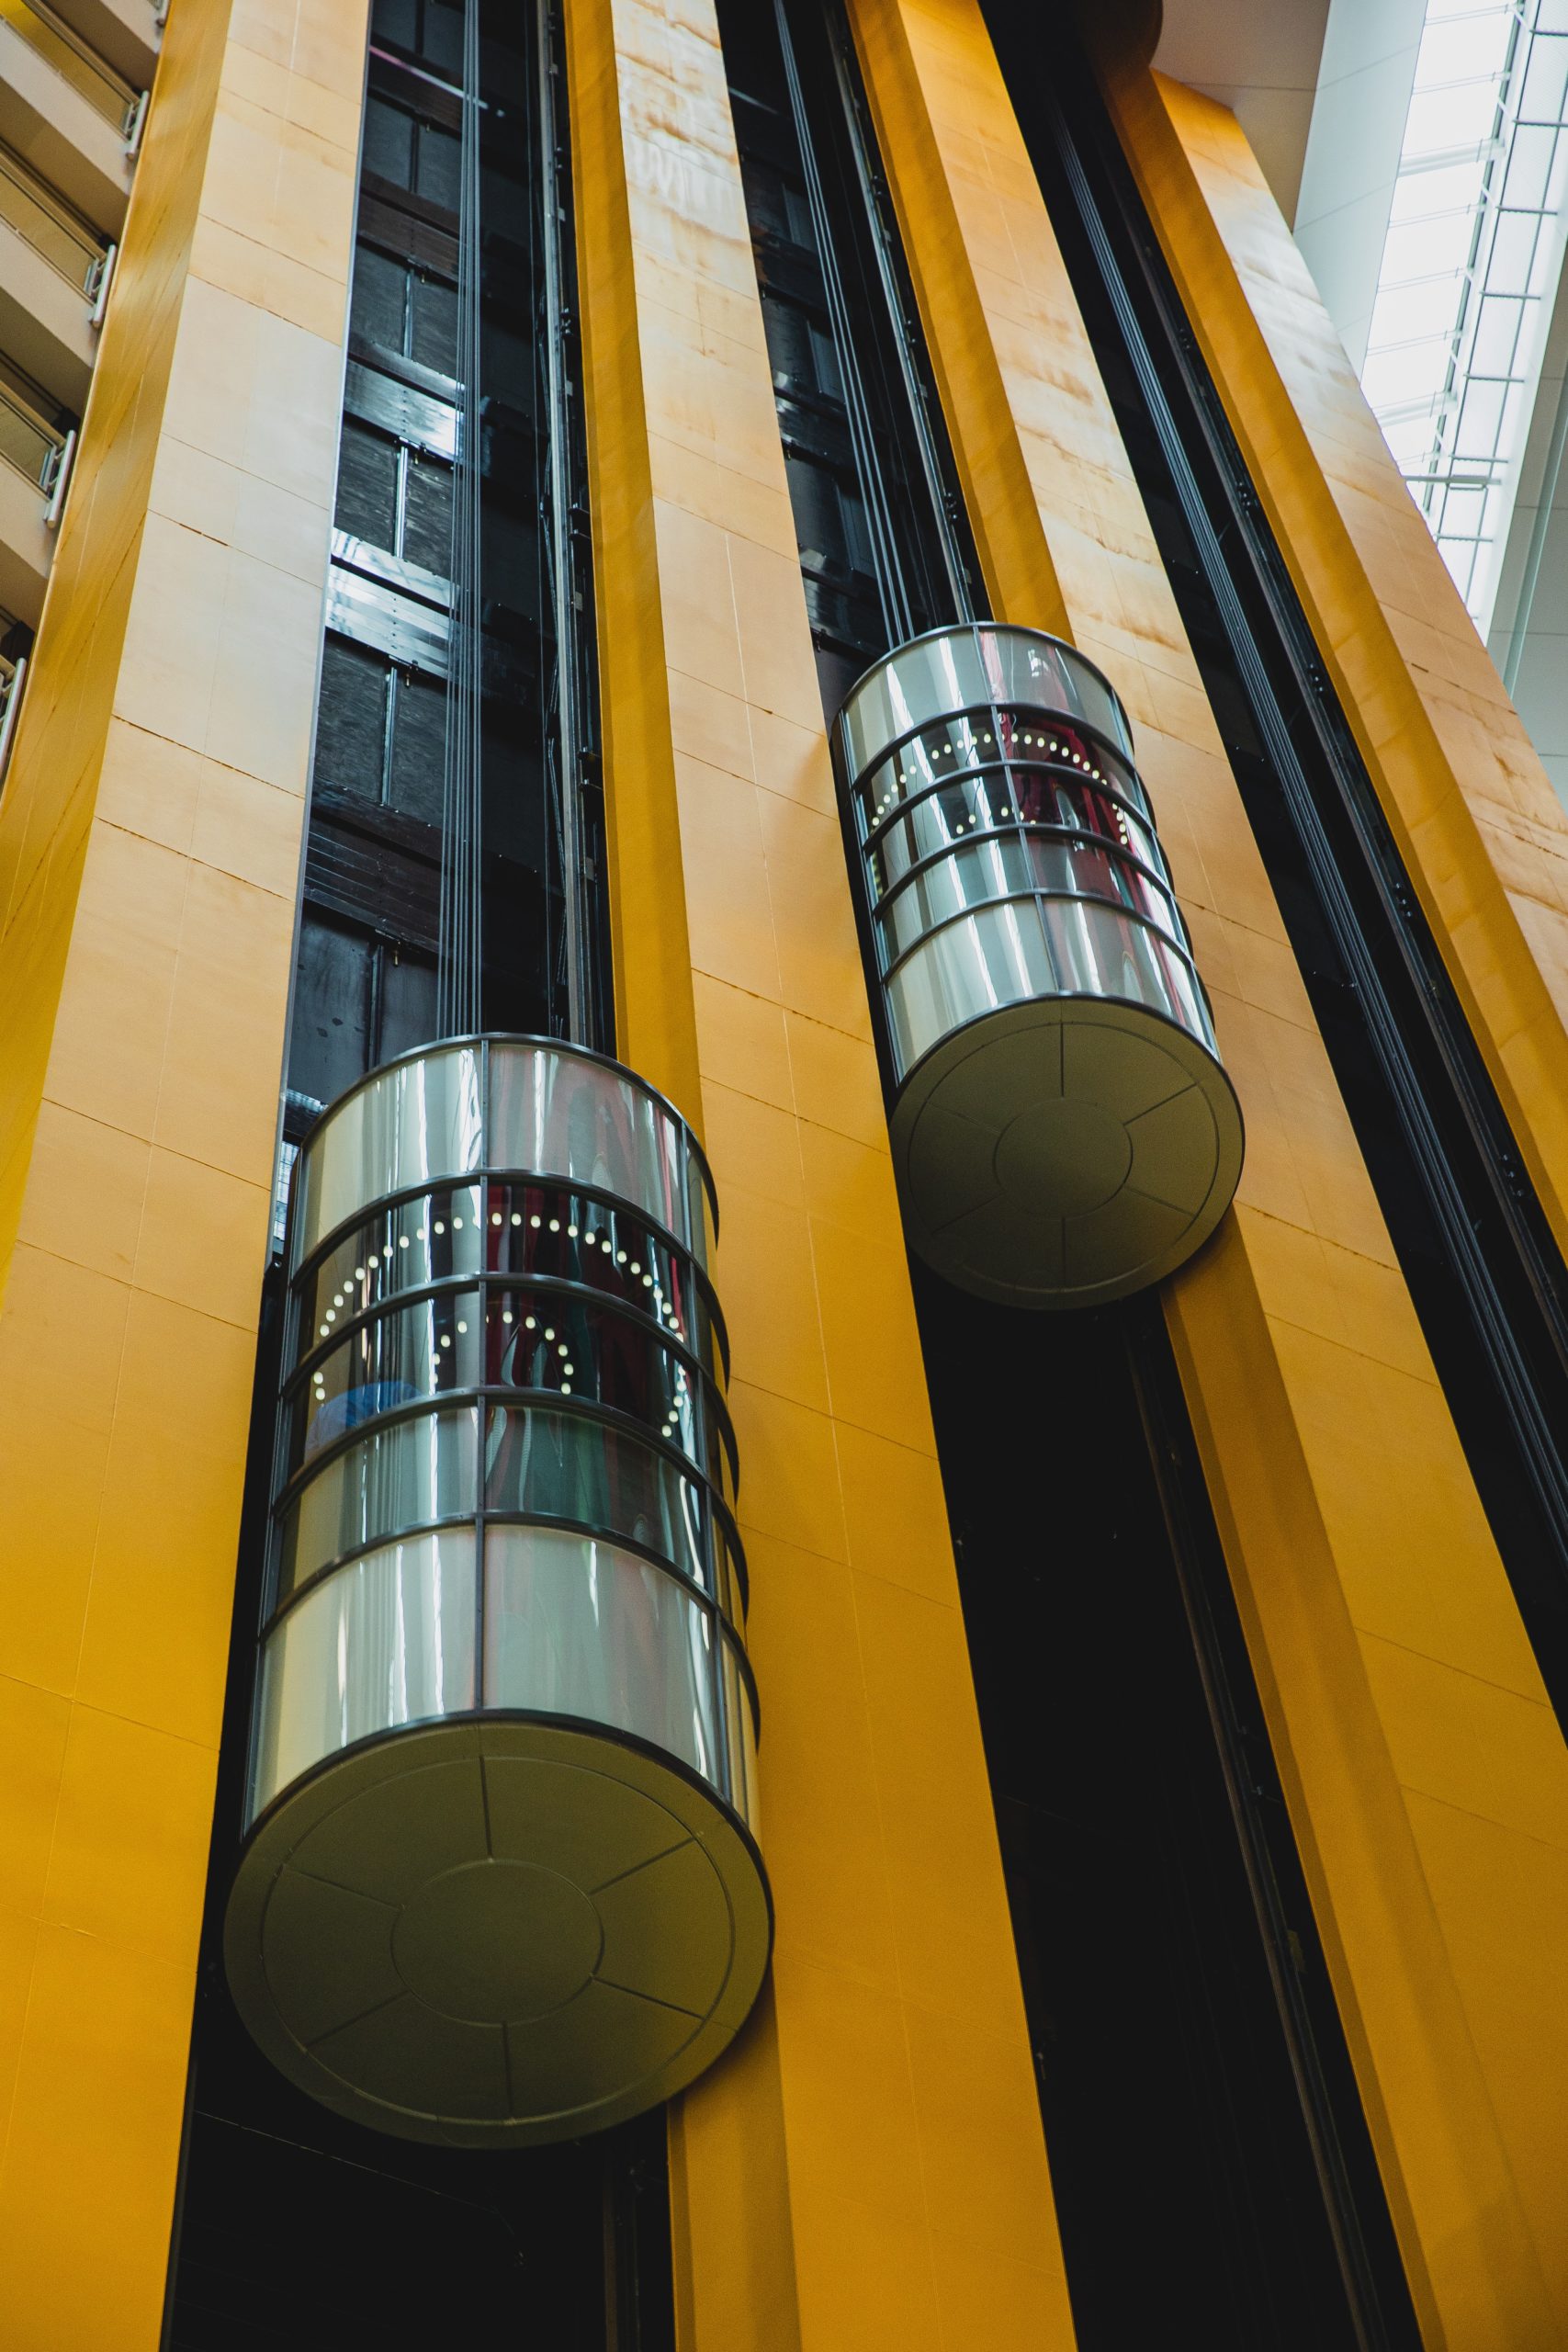 Color photograph of the outside of a tall building. The building has orange colored metal columns reaching upwards. Between columns are tubelike elevators - outside the building running along the face.